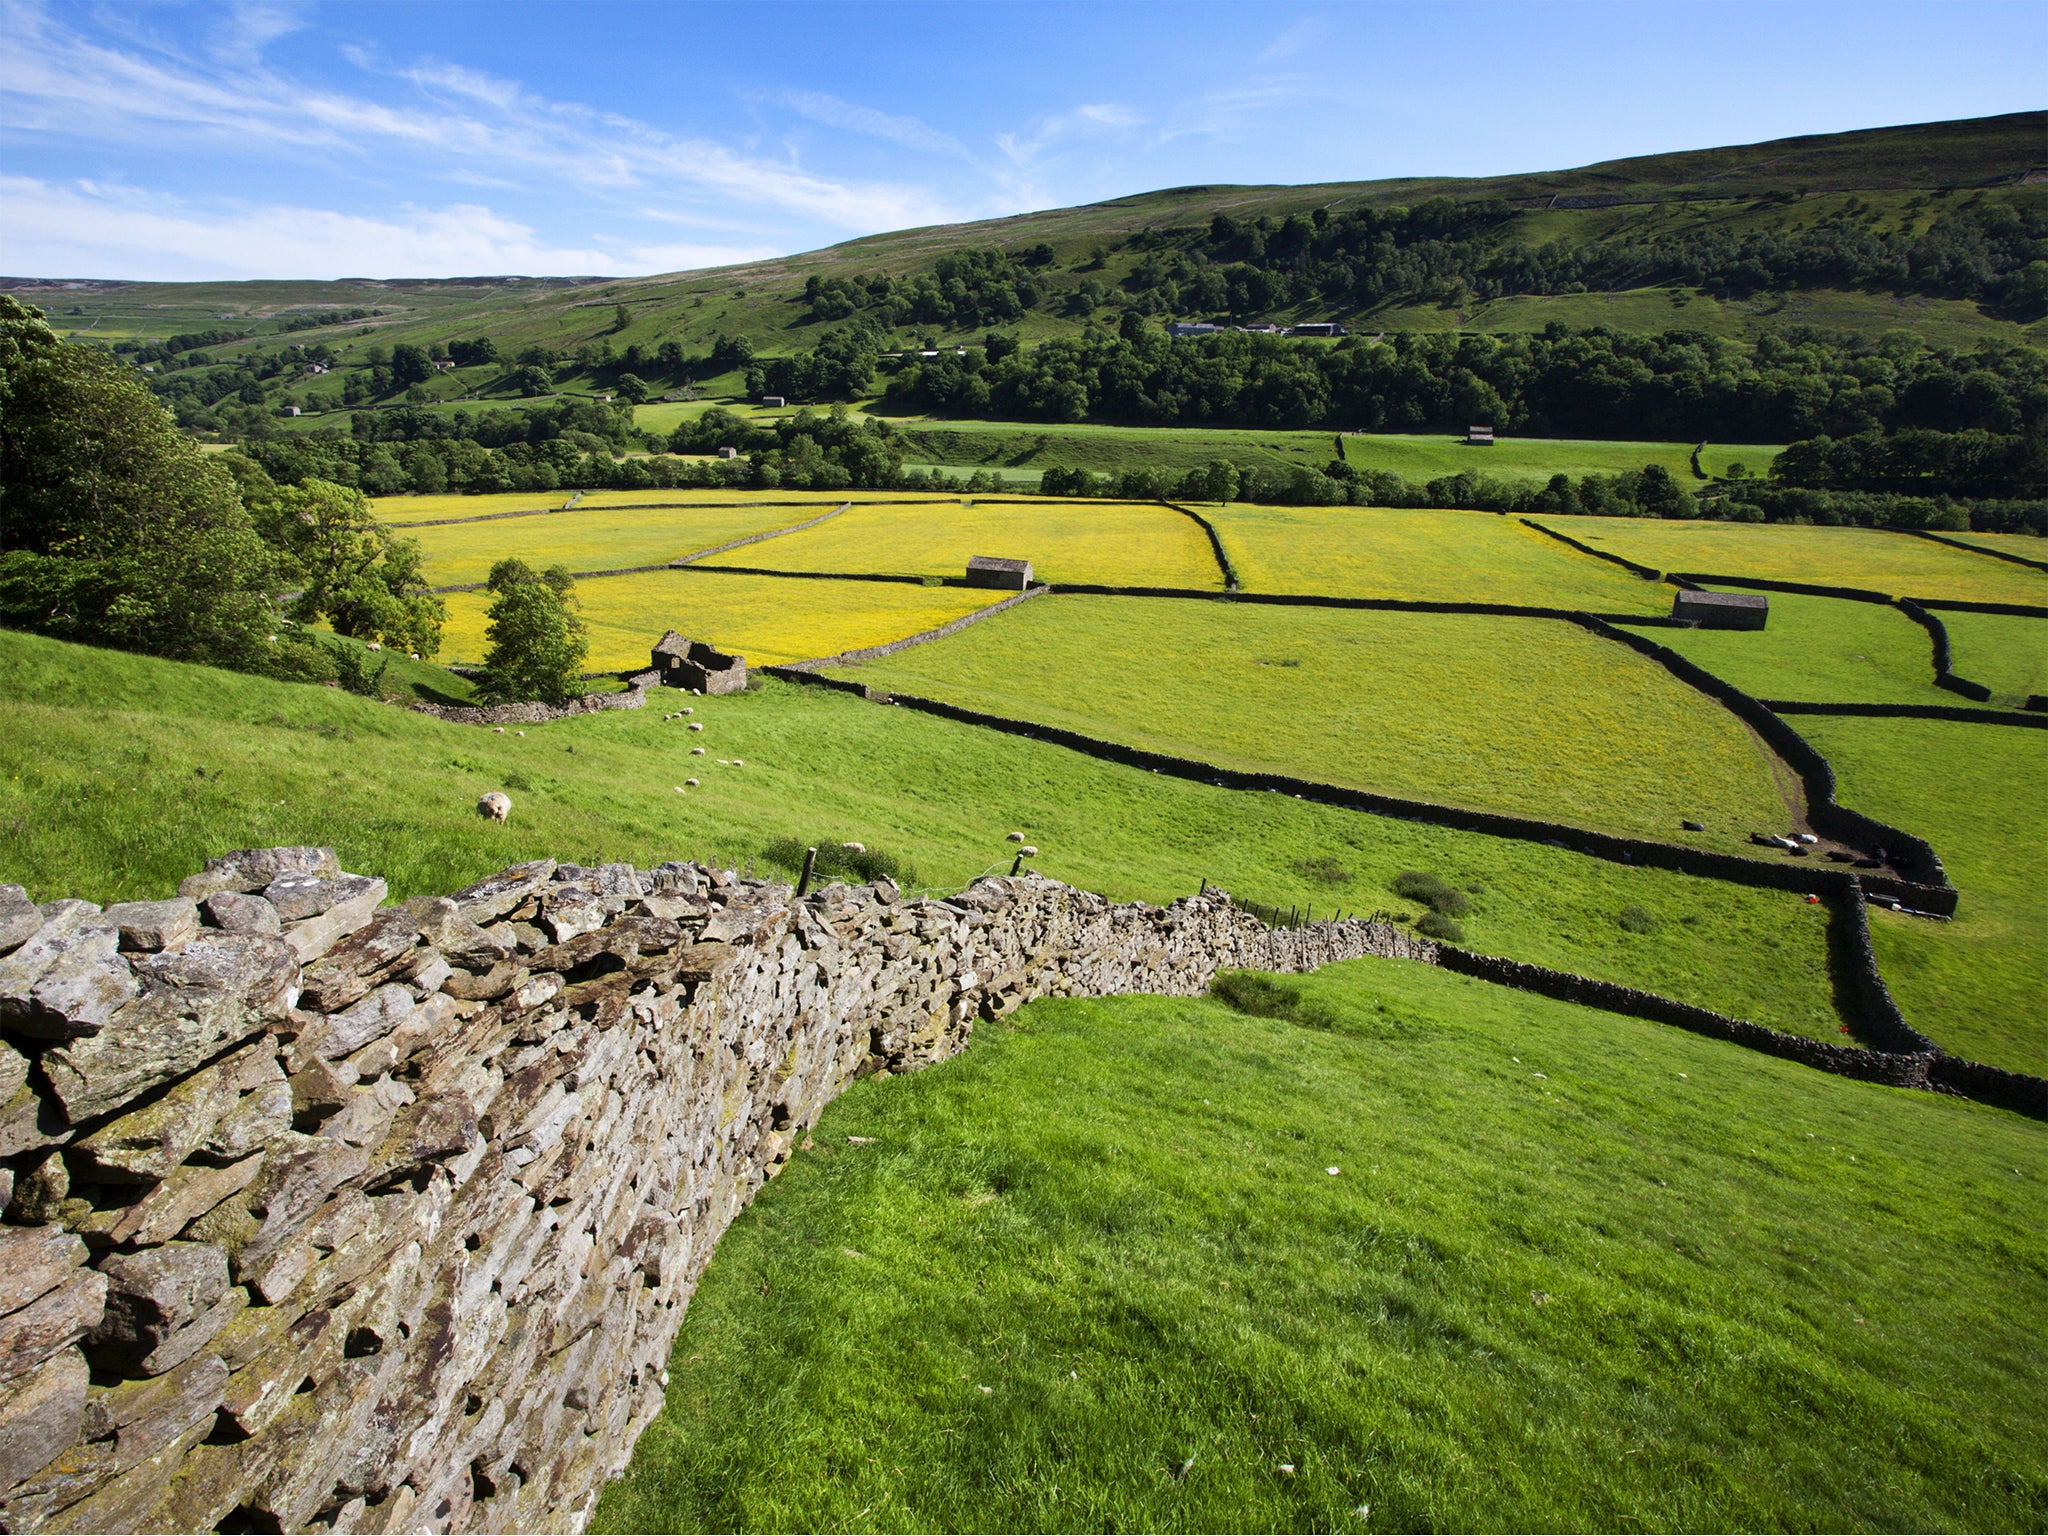 The Yorkshire Dales. National Parks cover 10 per cent of England